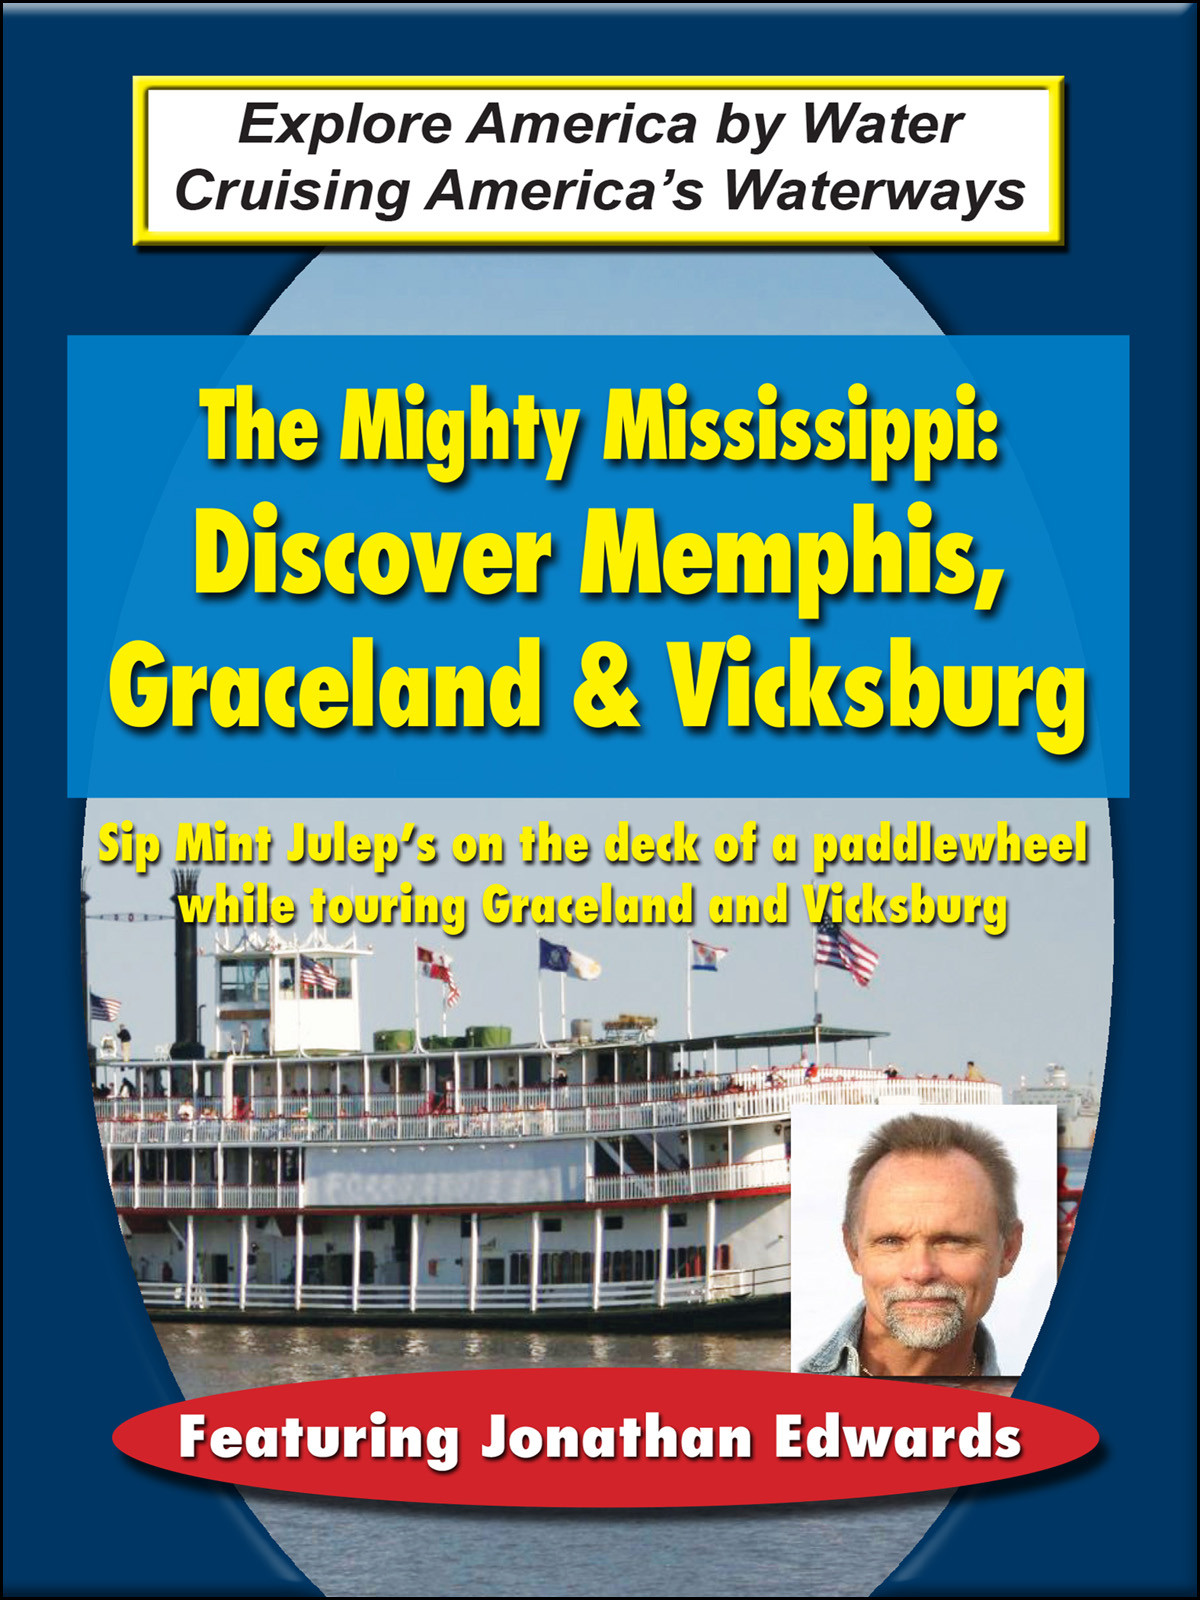 T8897 - The Mighty Mississippi Discover Memphis, Graceland & Vicksburg